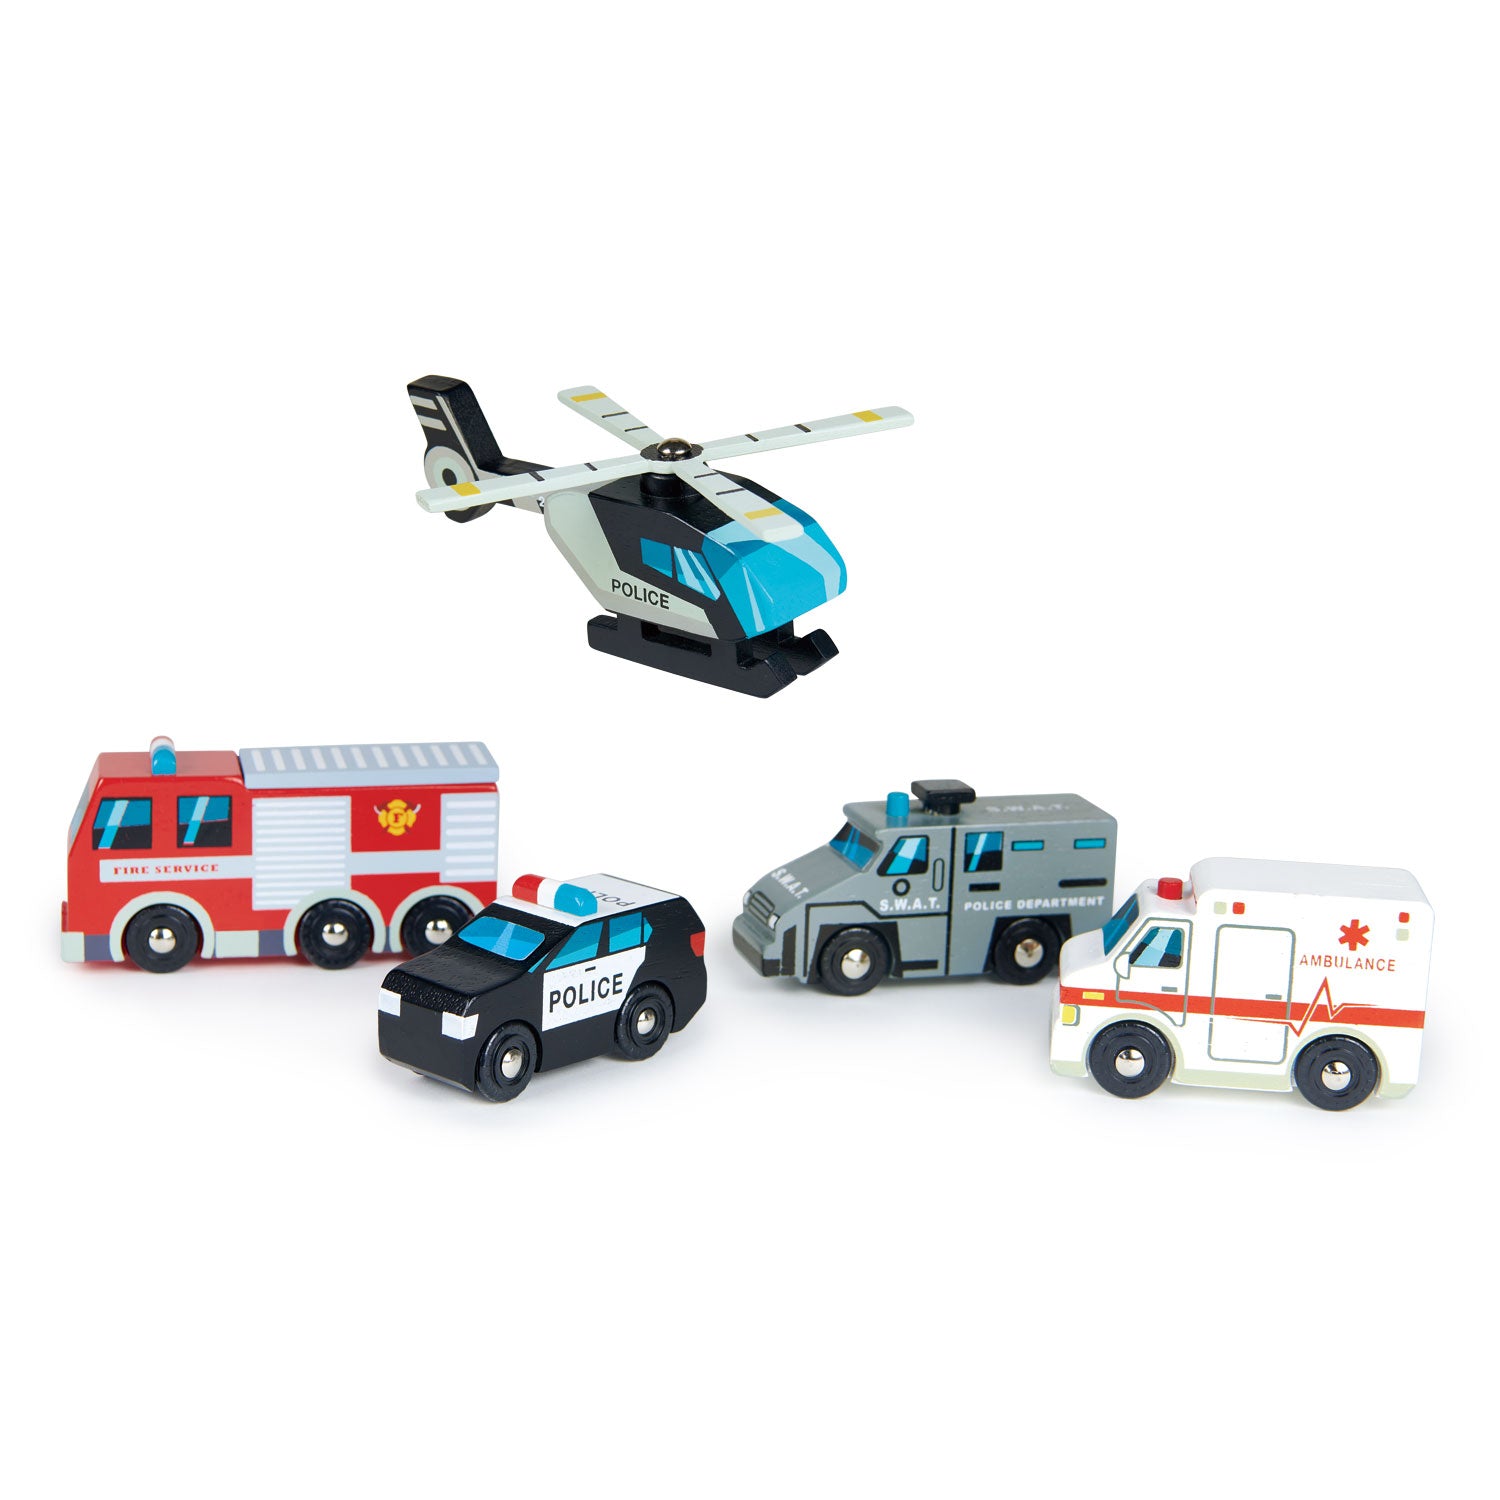 <p>Solid wood vehicles. Set includes: helicopter with rotating blades, ambulance, fire engine, police car and S.W.A.T car.</p>
<p>Age range: 3 years +  </p>
<p>Product size: 7.87 x 7.87 x 2.36”  </p>
<p>Weight: 0.77 Ibs</p>
<p><a href="https://www.dropbox.com/s/4jnbuvufl4wjdtu/TL8662%20Emergency%20Vehicles%20Printable.pdf?dl=0"><strong>Download Emergency Vehicles Printable</strong></a></p>
